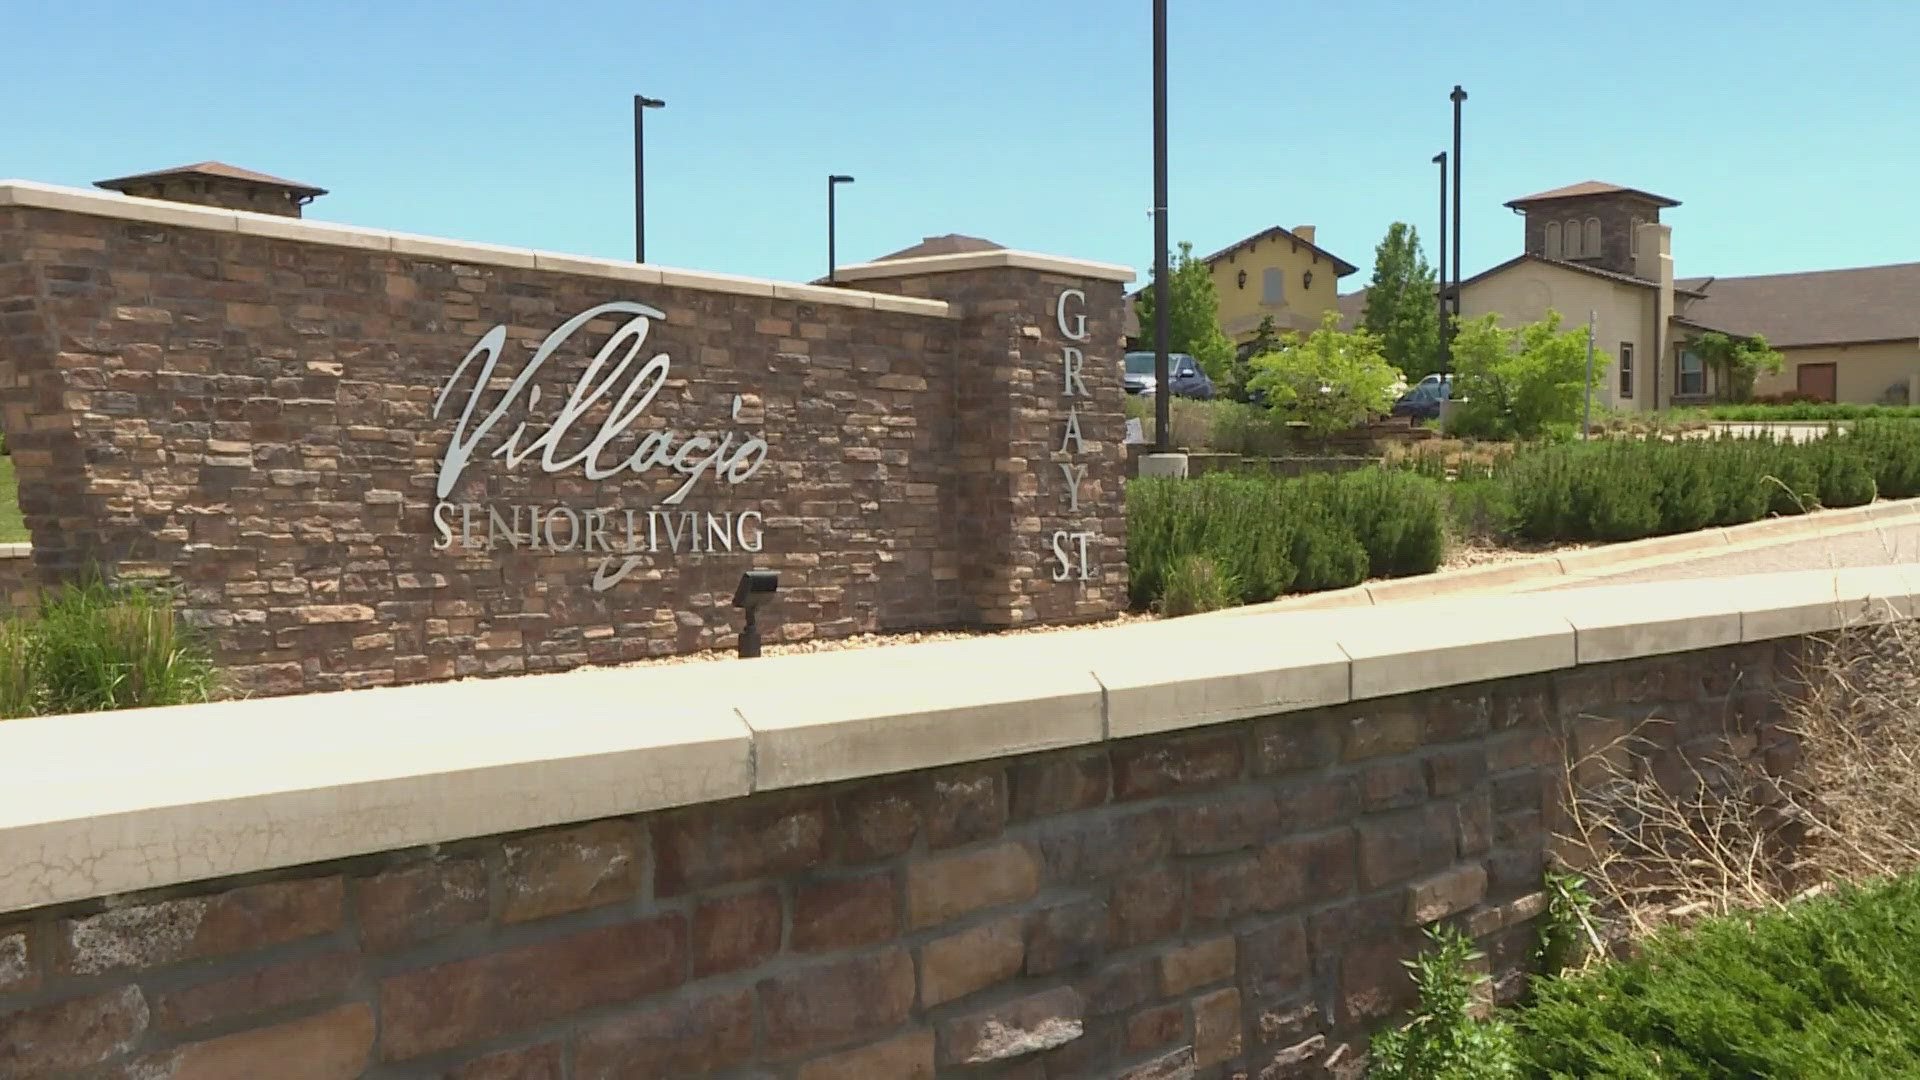 Villagio Broomfield was signing people up to move into the memory care facility right before it was sold, and everyone was told to get out.